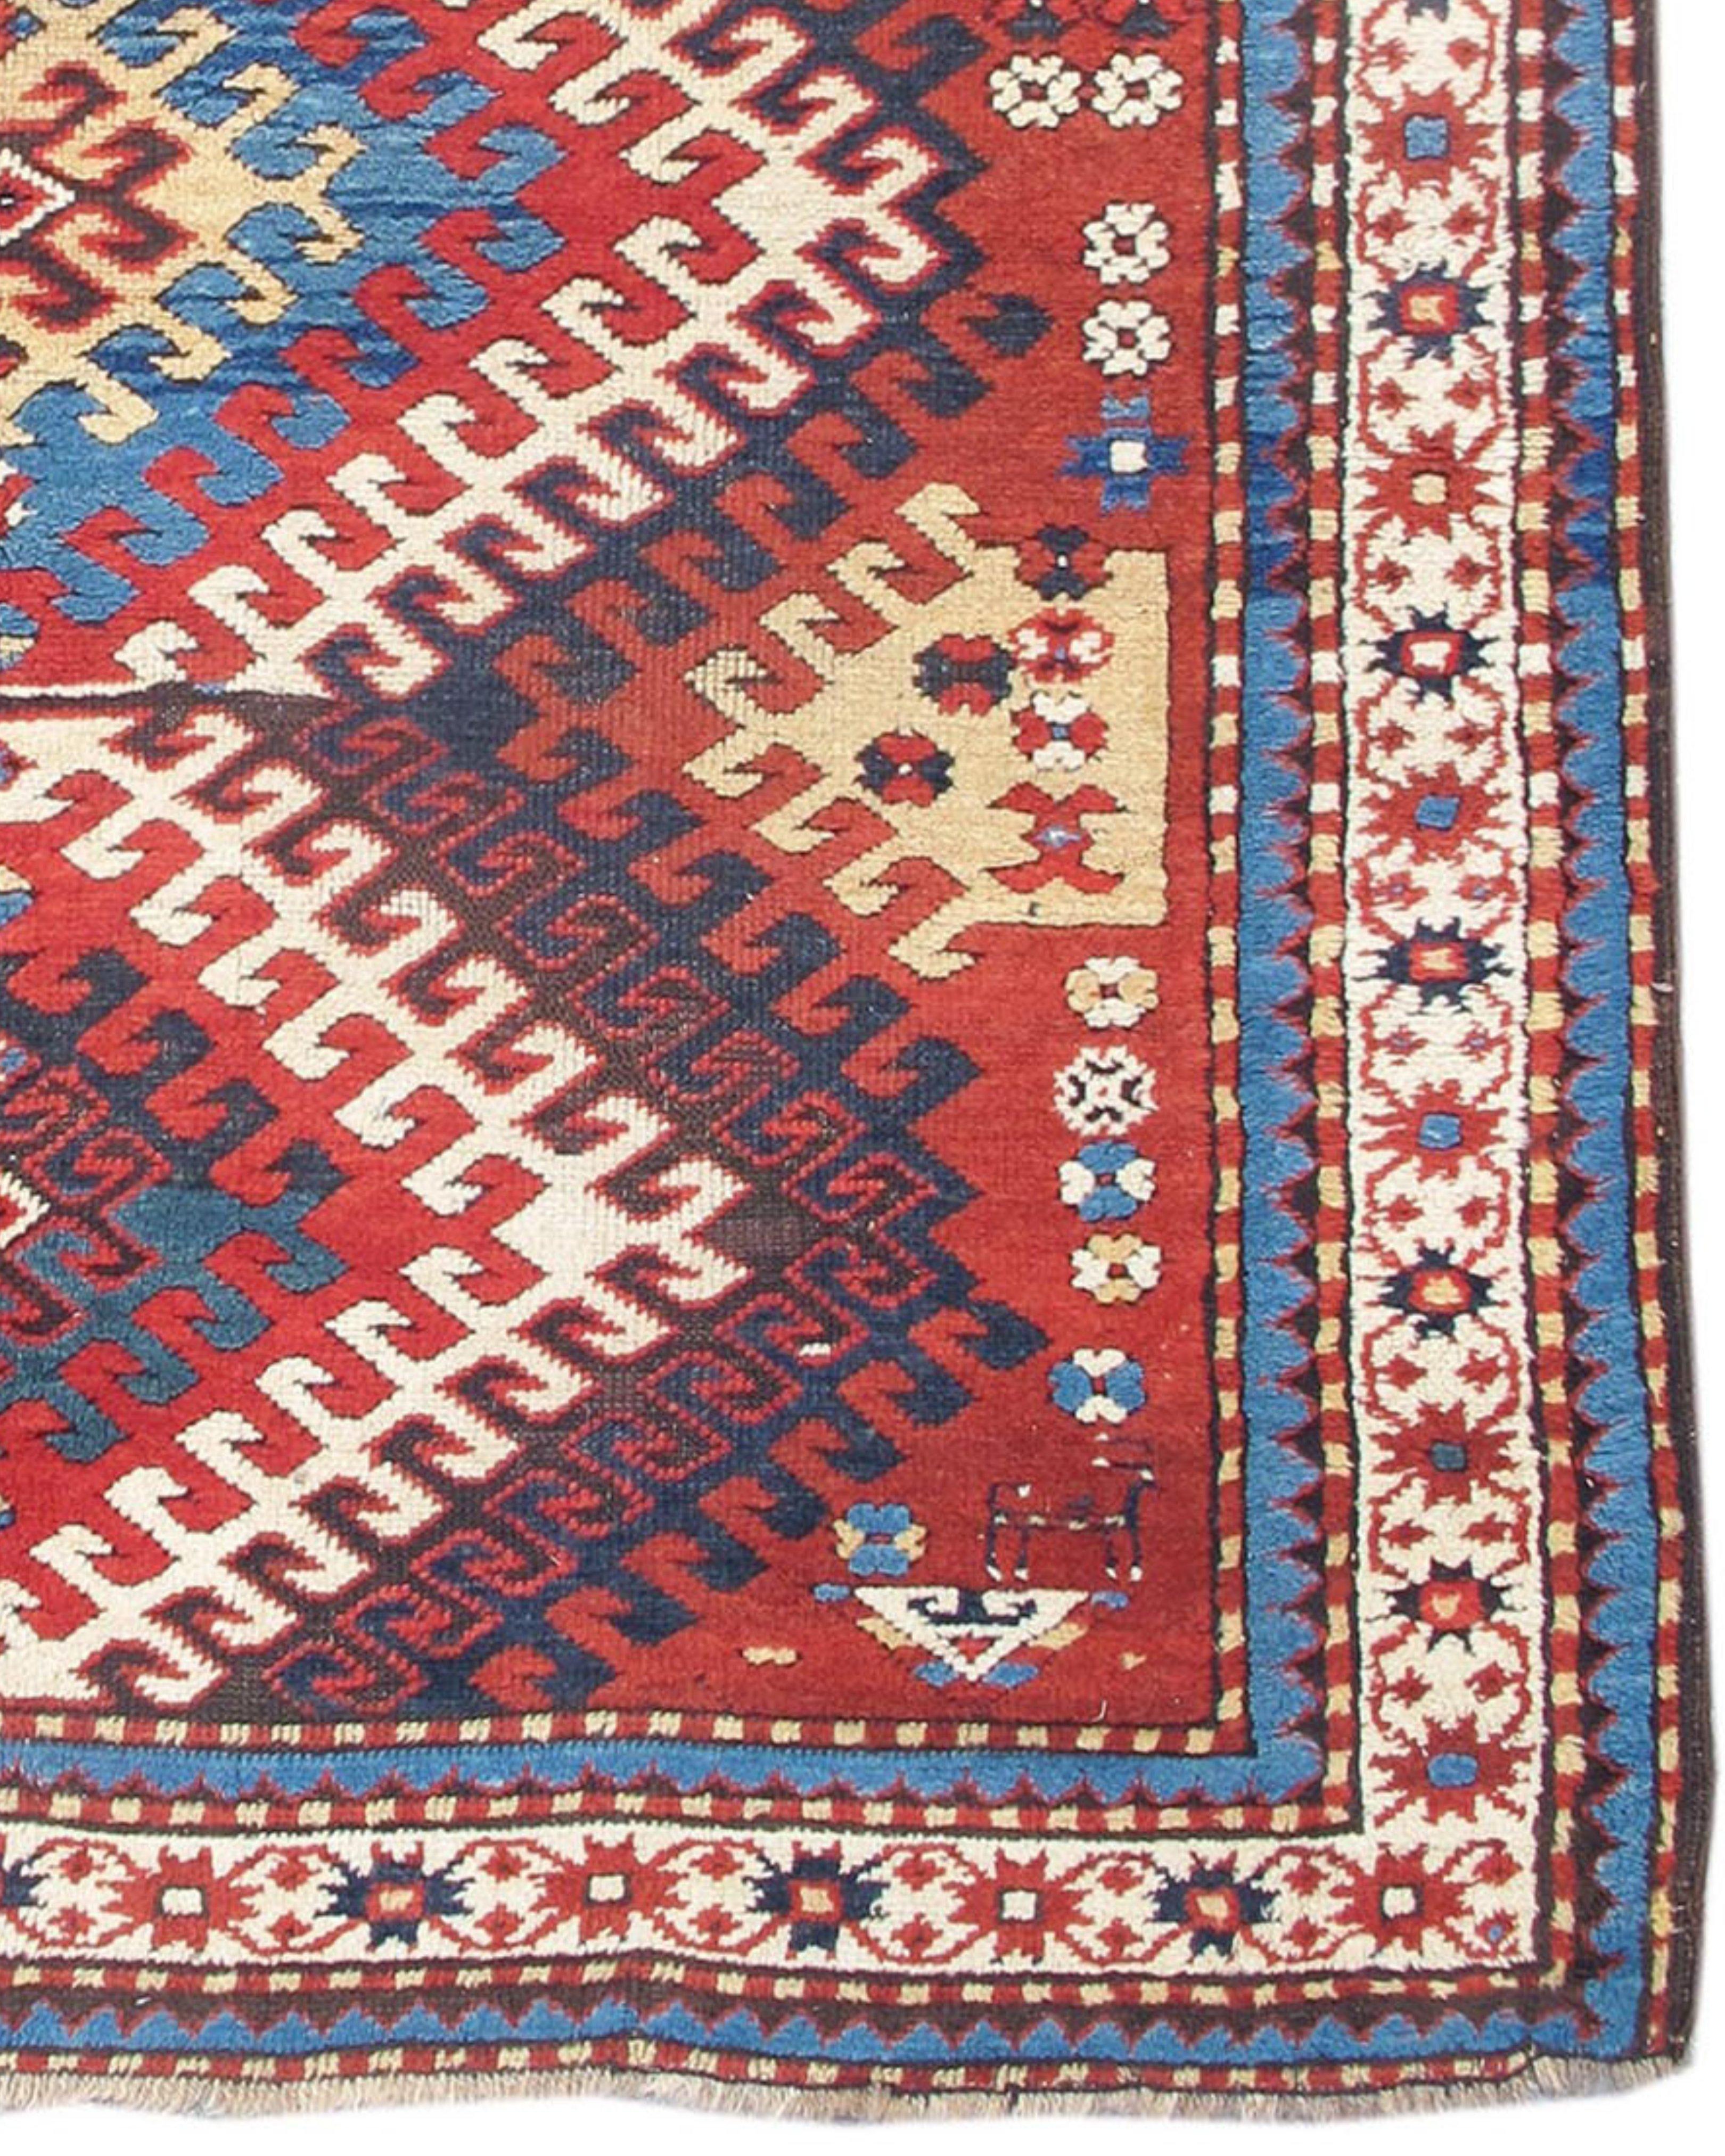 Antique Karabagh Rug, Late 19th Century In Excellent Condition For Sale In San Francisco, CA